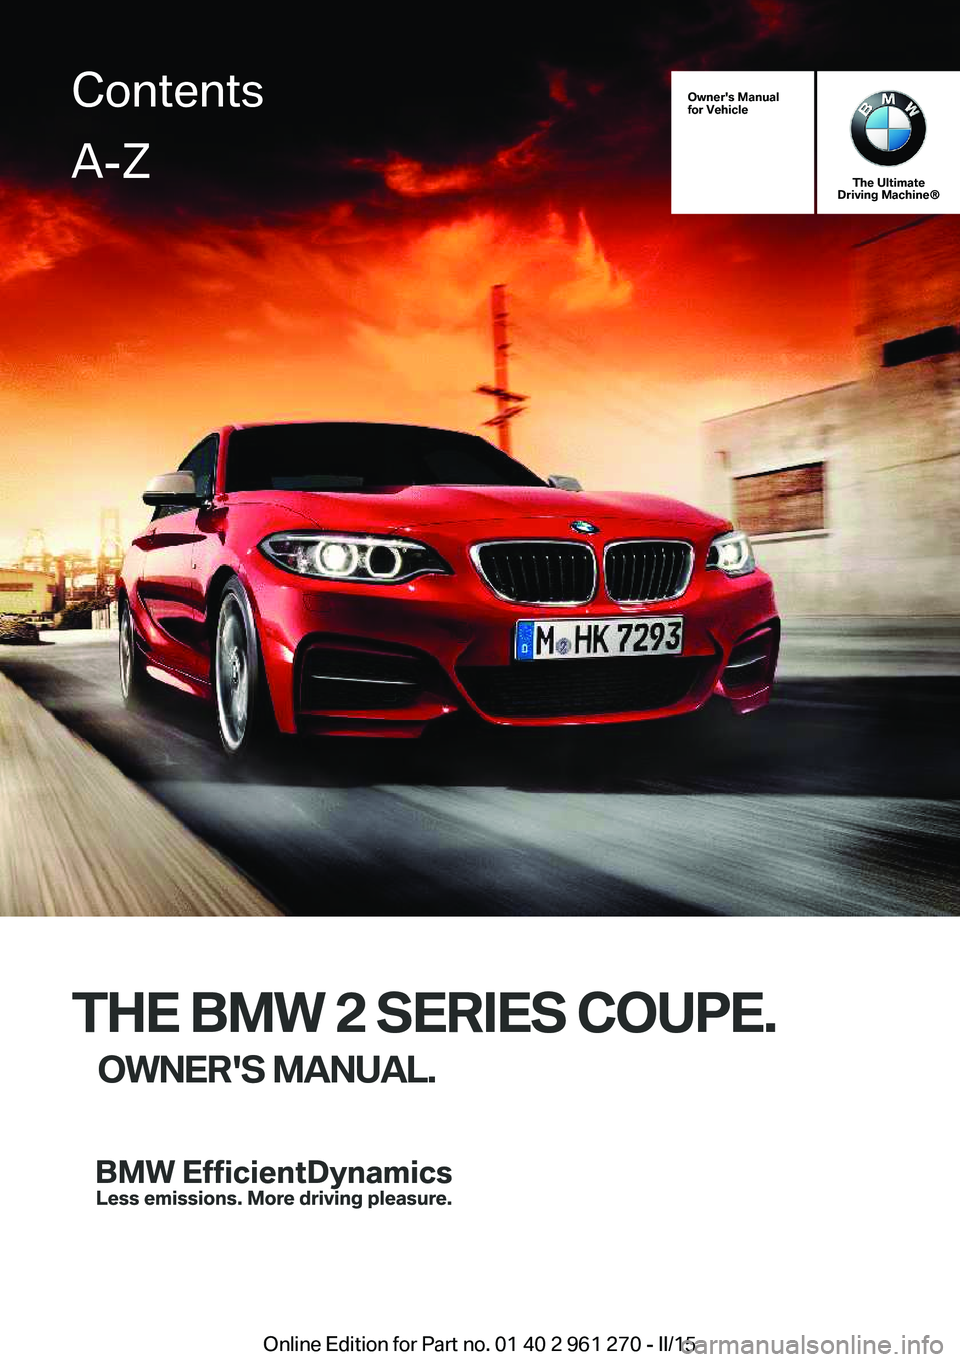 BMW 228I COUPE 2016  Owners Manual Owner's Manual
for Vehicle
The Ultimate
Driving Machine®
THE BMW 2 SERIES COUPE.
OWNER'S MANUAL.
ContentsA-Z
Online Edition for Part no. 01 40 2 961 270 - II/15   